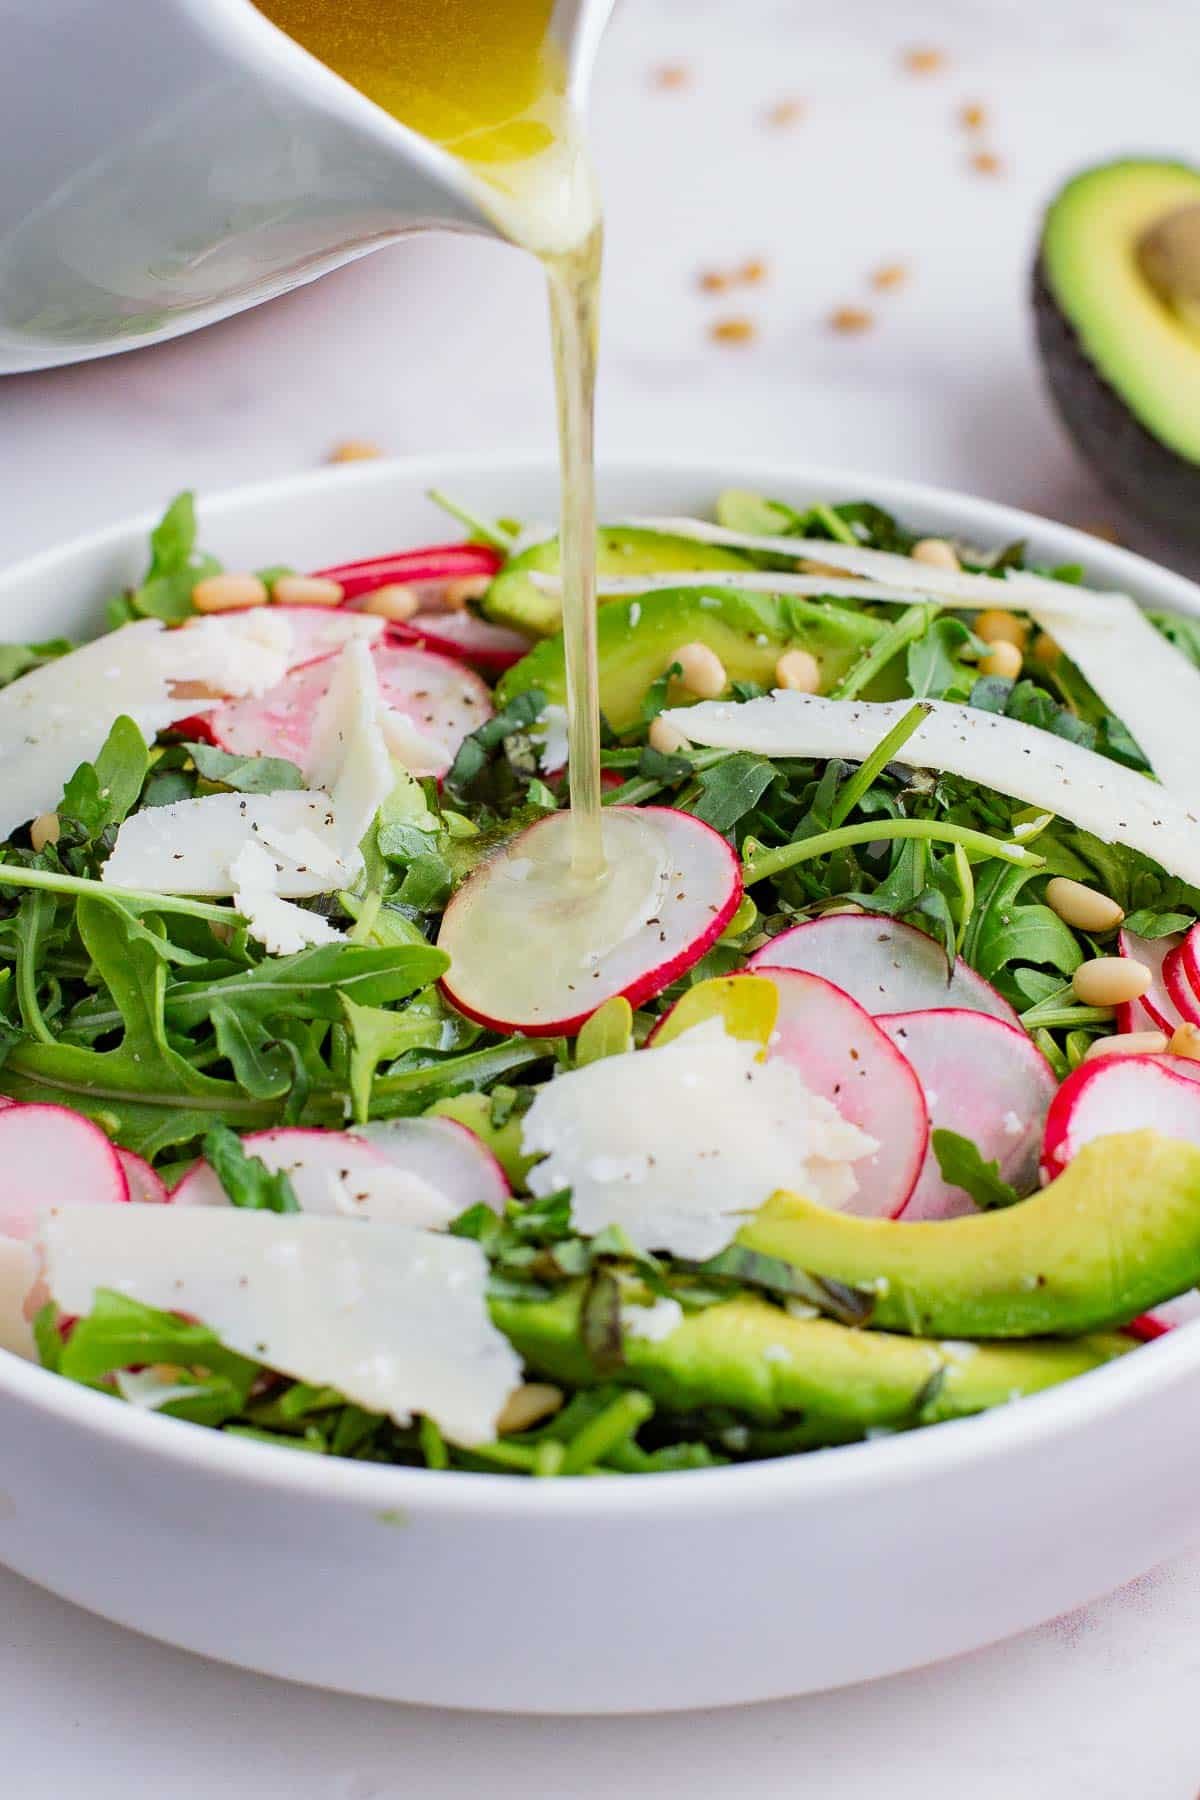 Dressing is poured over the simple arugula salad.